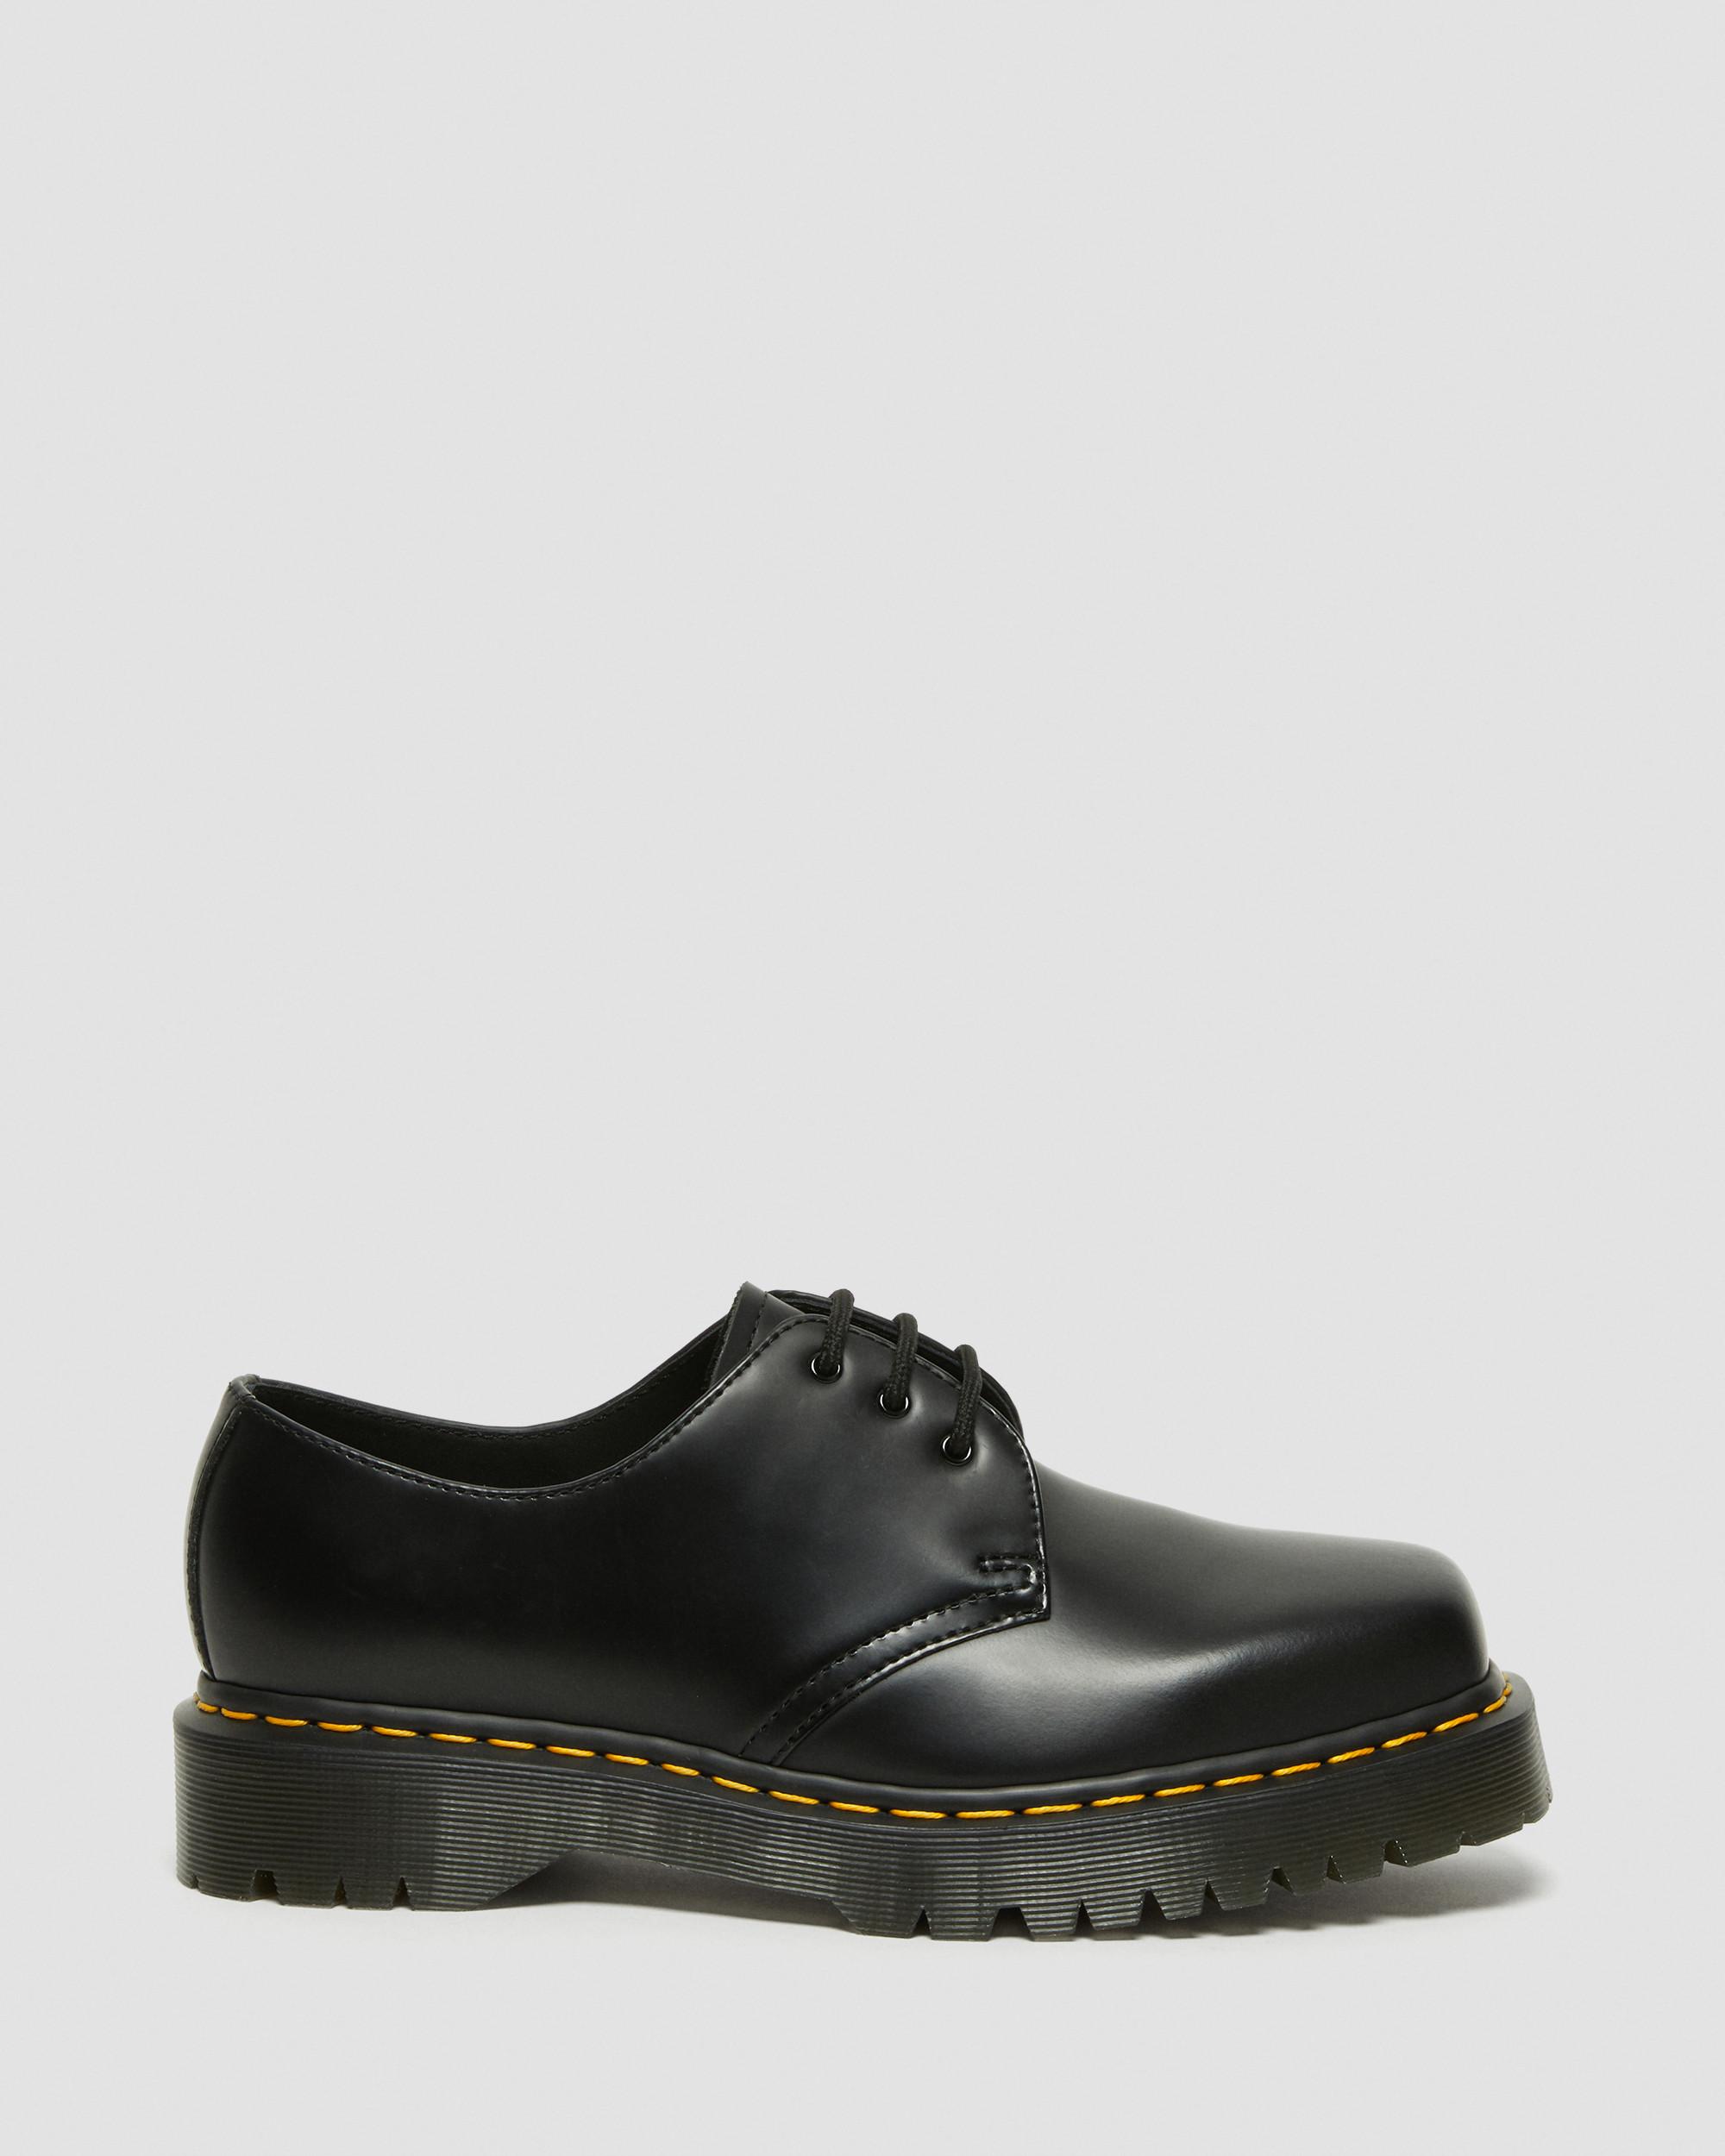 1461 Bex Squared Toe Leather Oxford Shoes | Dr. Martens